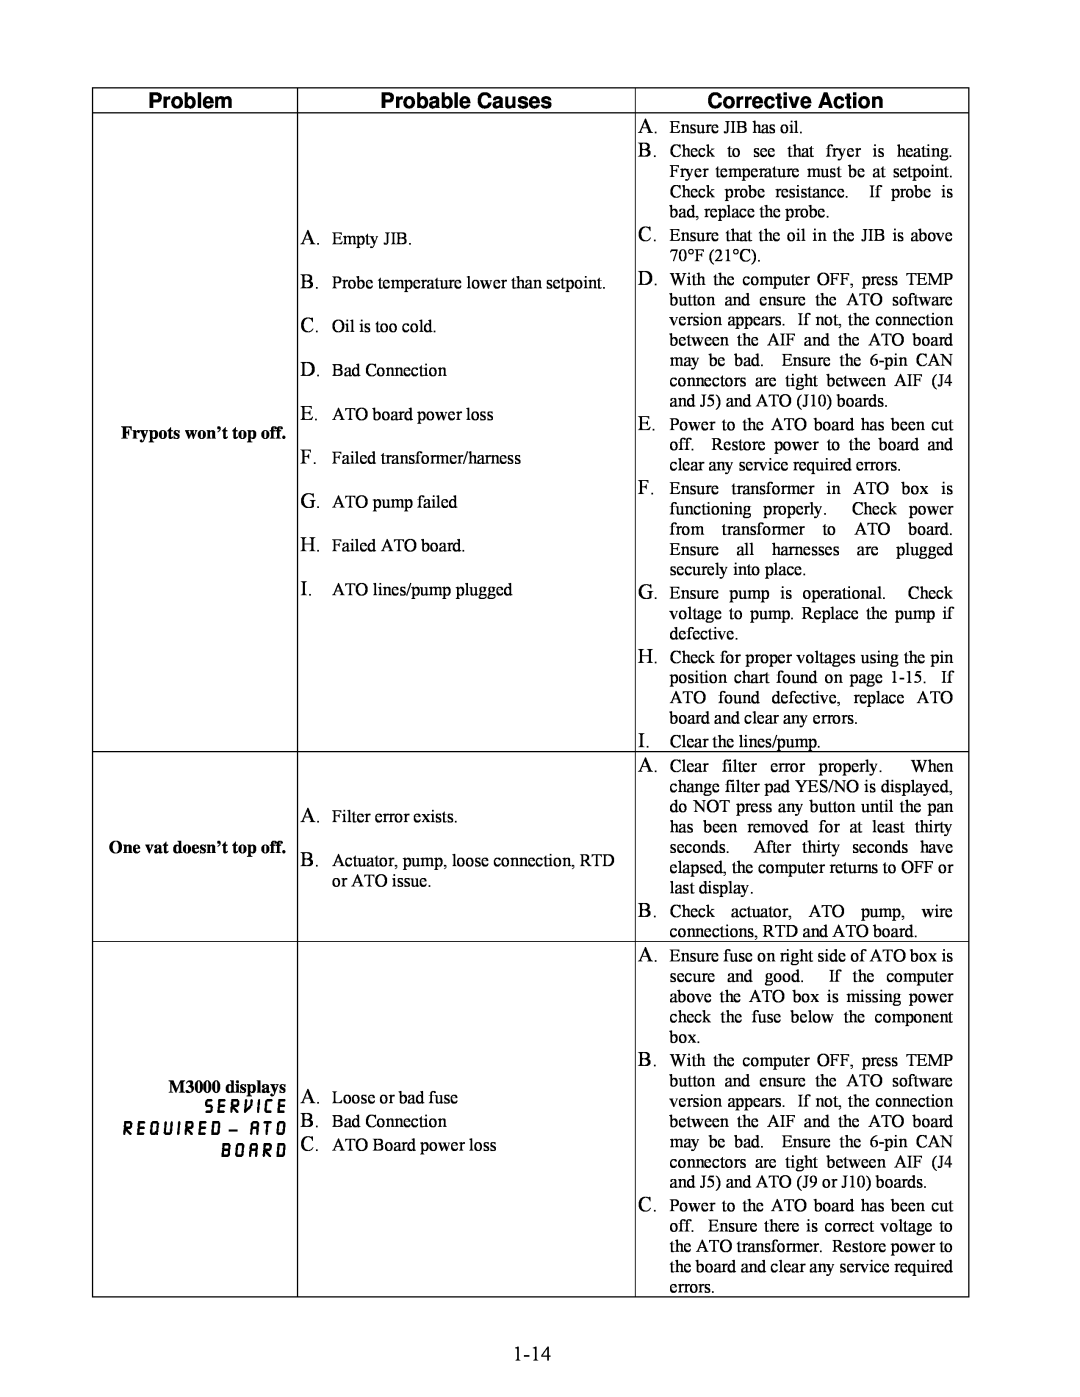 Frymaster BIELA14 manual Problem, Probable Causes, Corrective Action, 1-14, Service, Required – Ato, Board 